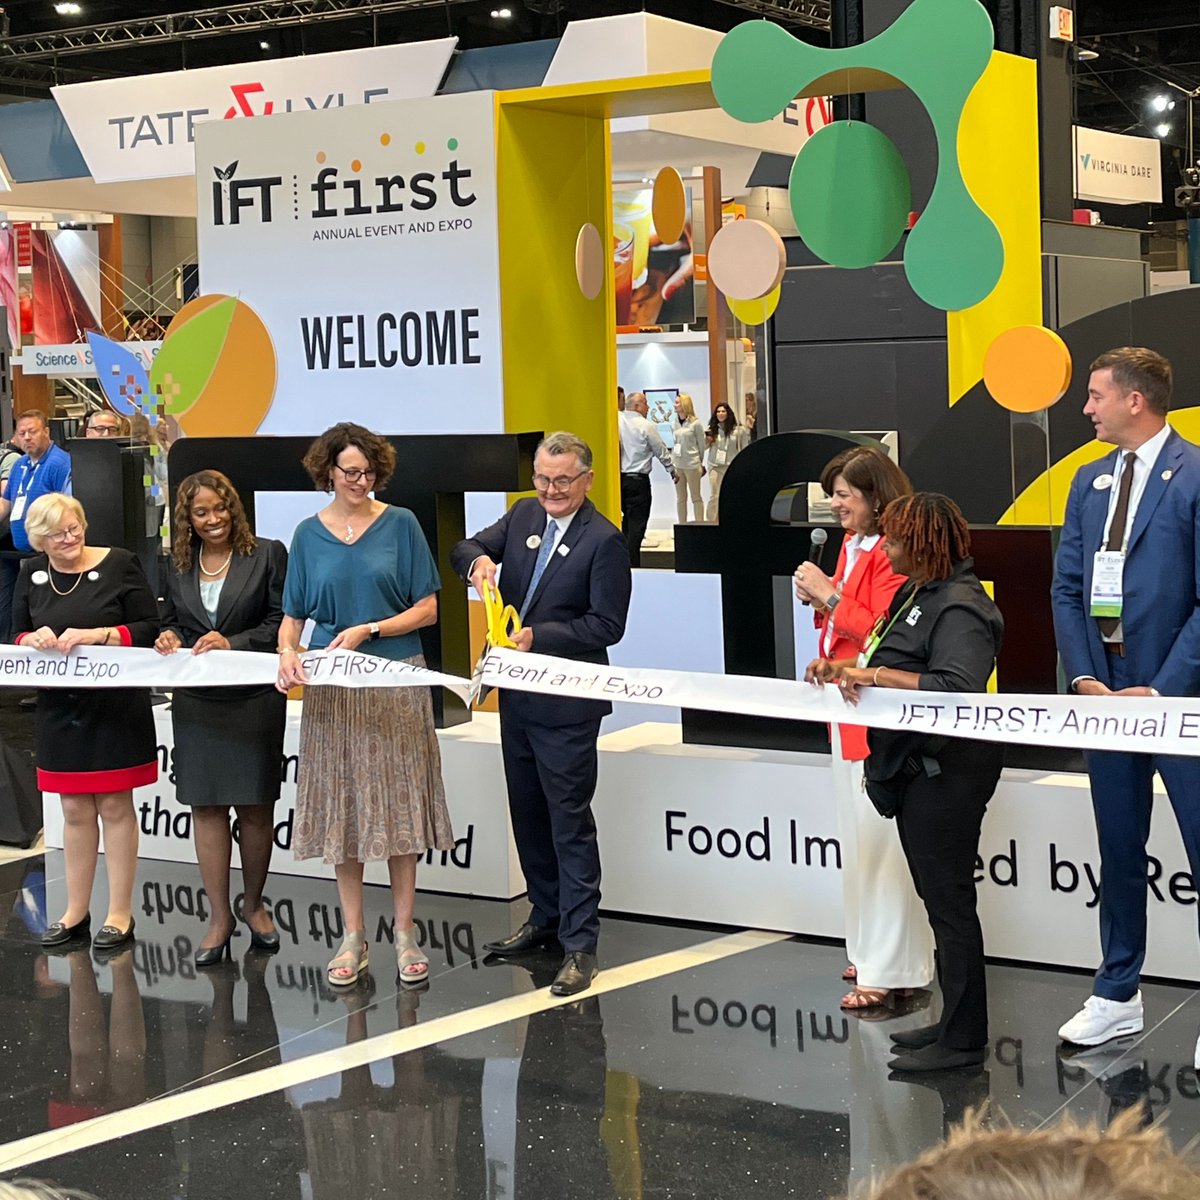 Welcome to Chicago, @IFT! We are thrilled to host #IFTFIRST at @McCormick_Place and welcome thousands of experts in food technology to our great city.